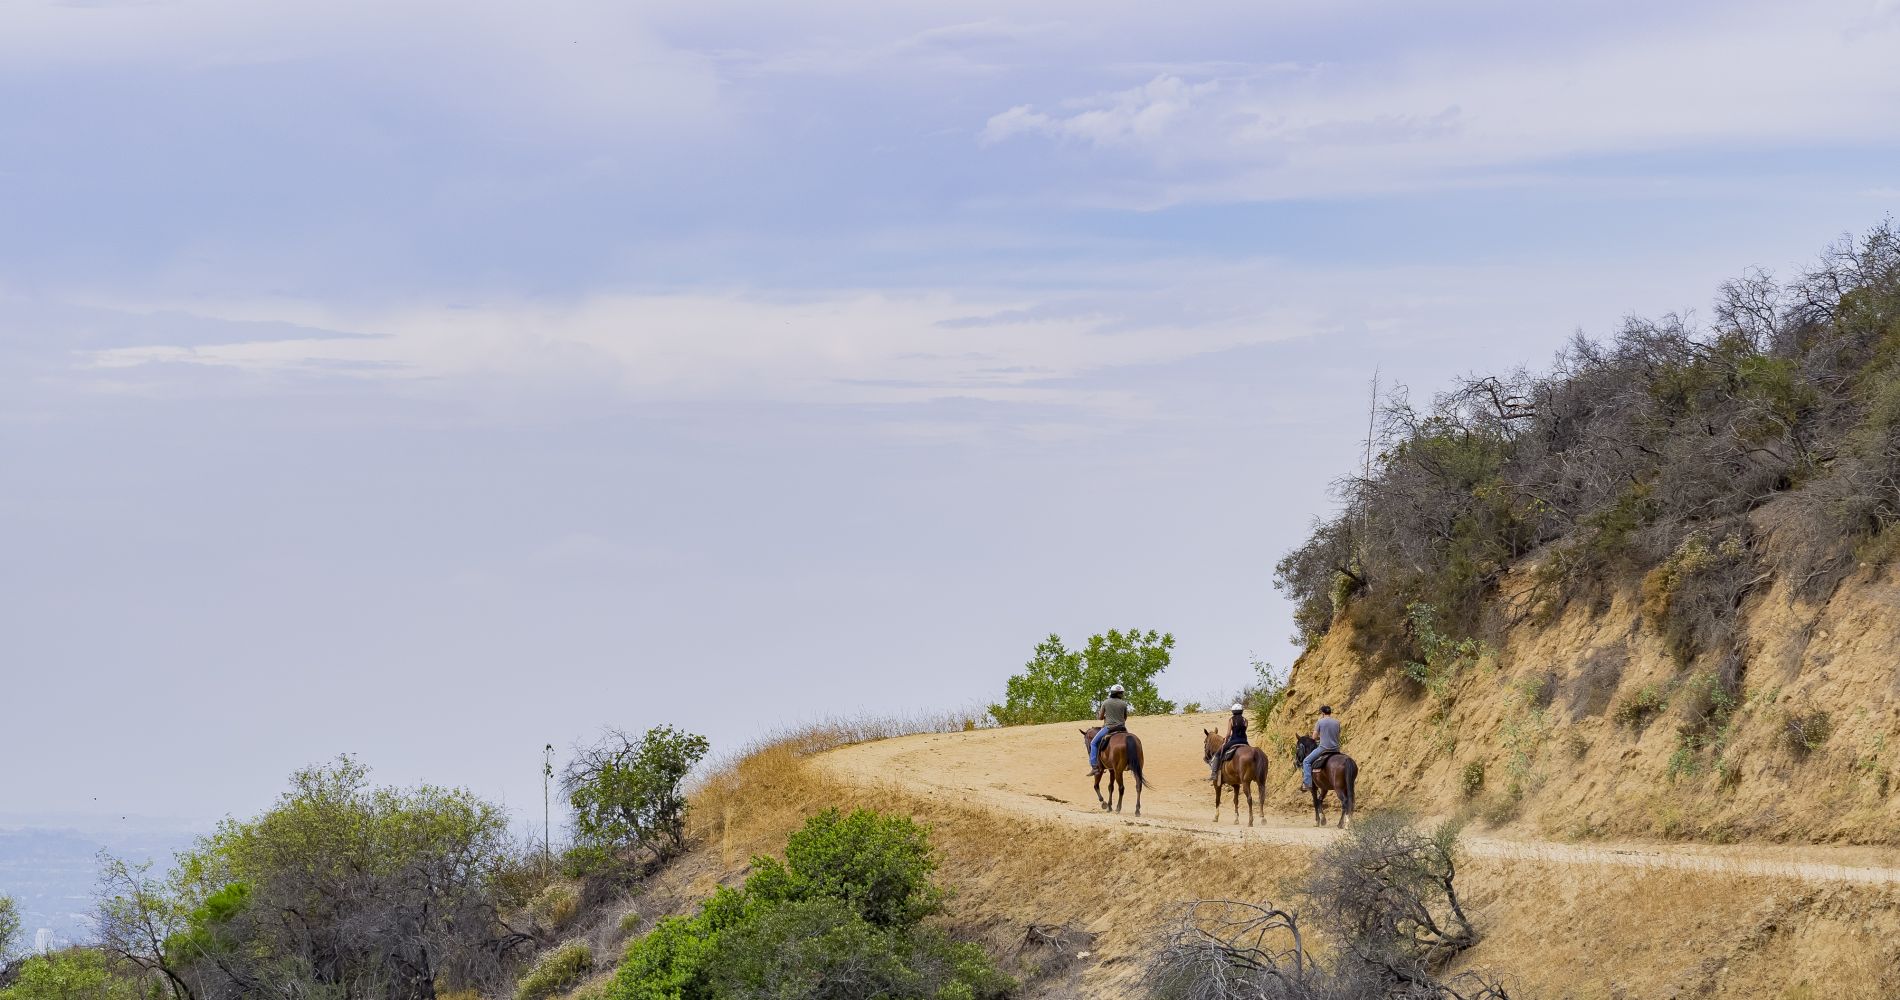 three people ride on horseback along a california hillside as part of a Tinggly experience wedding gift